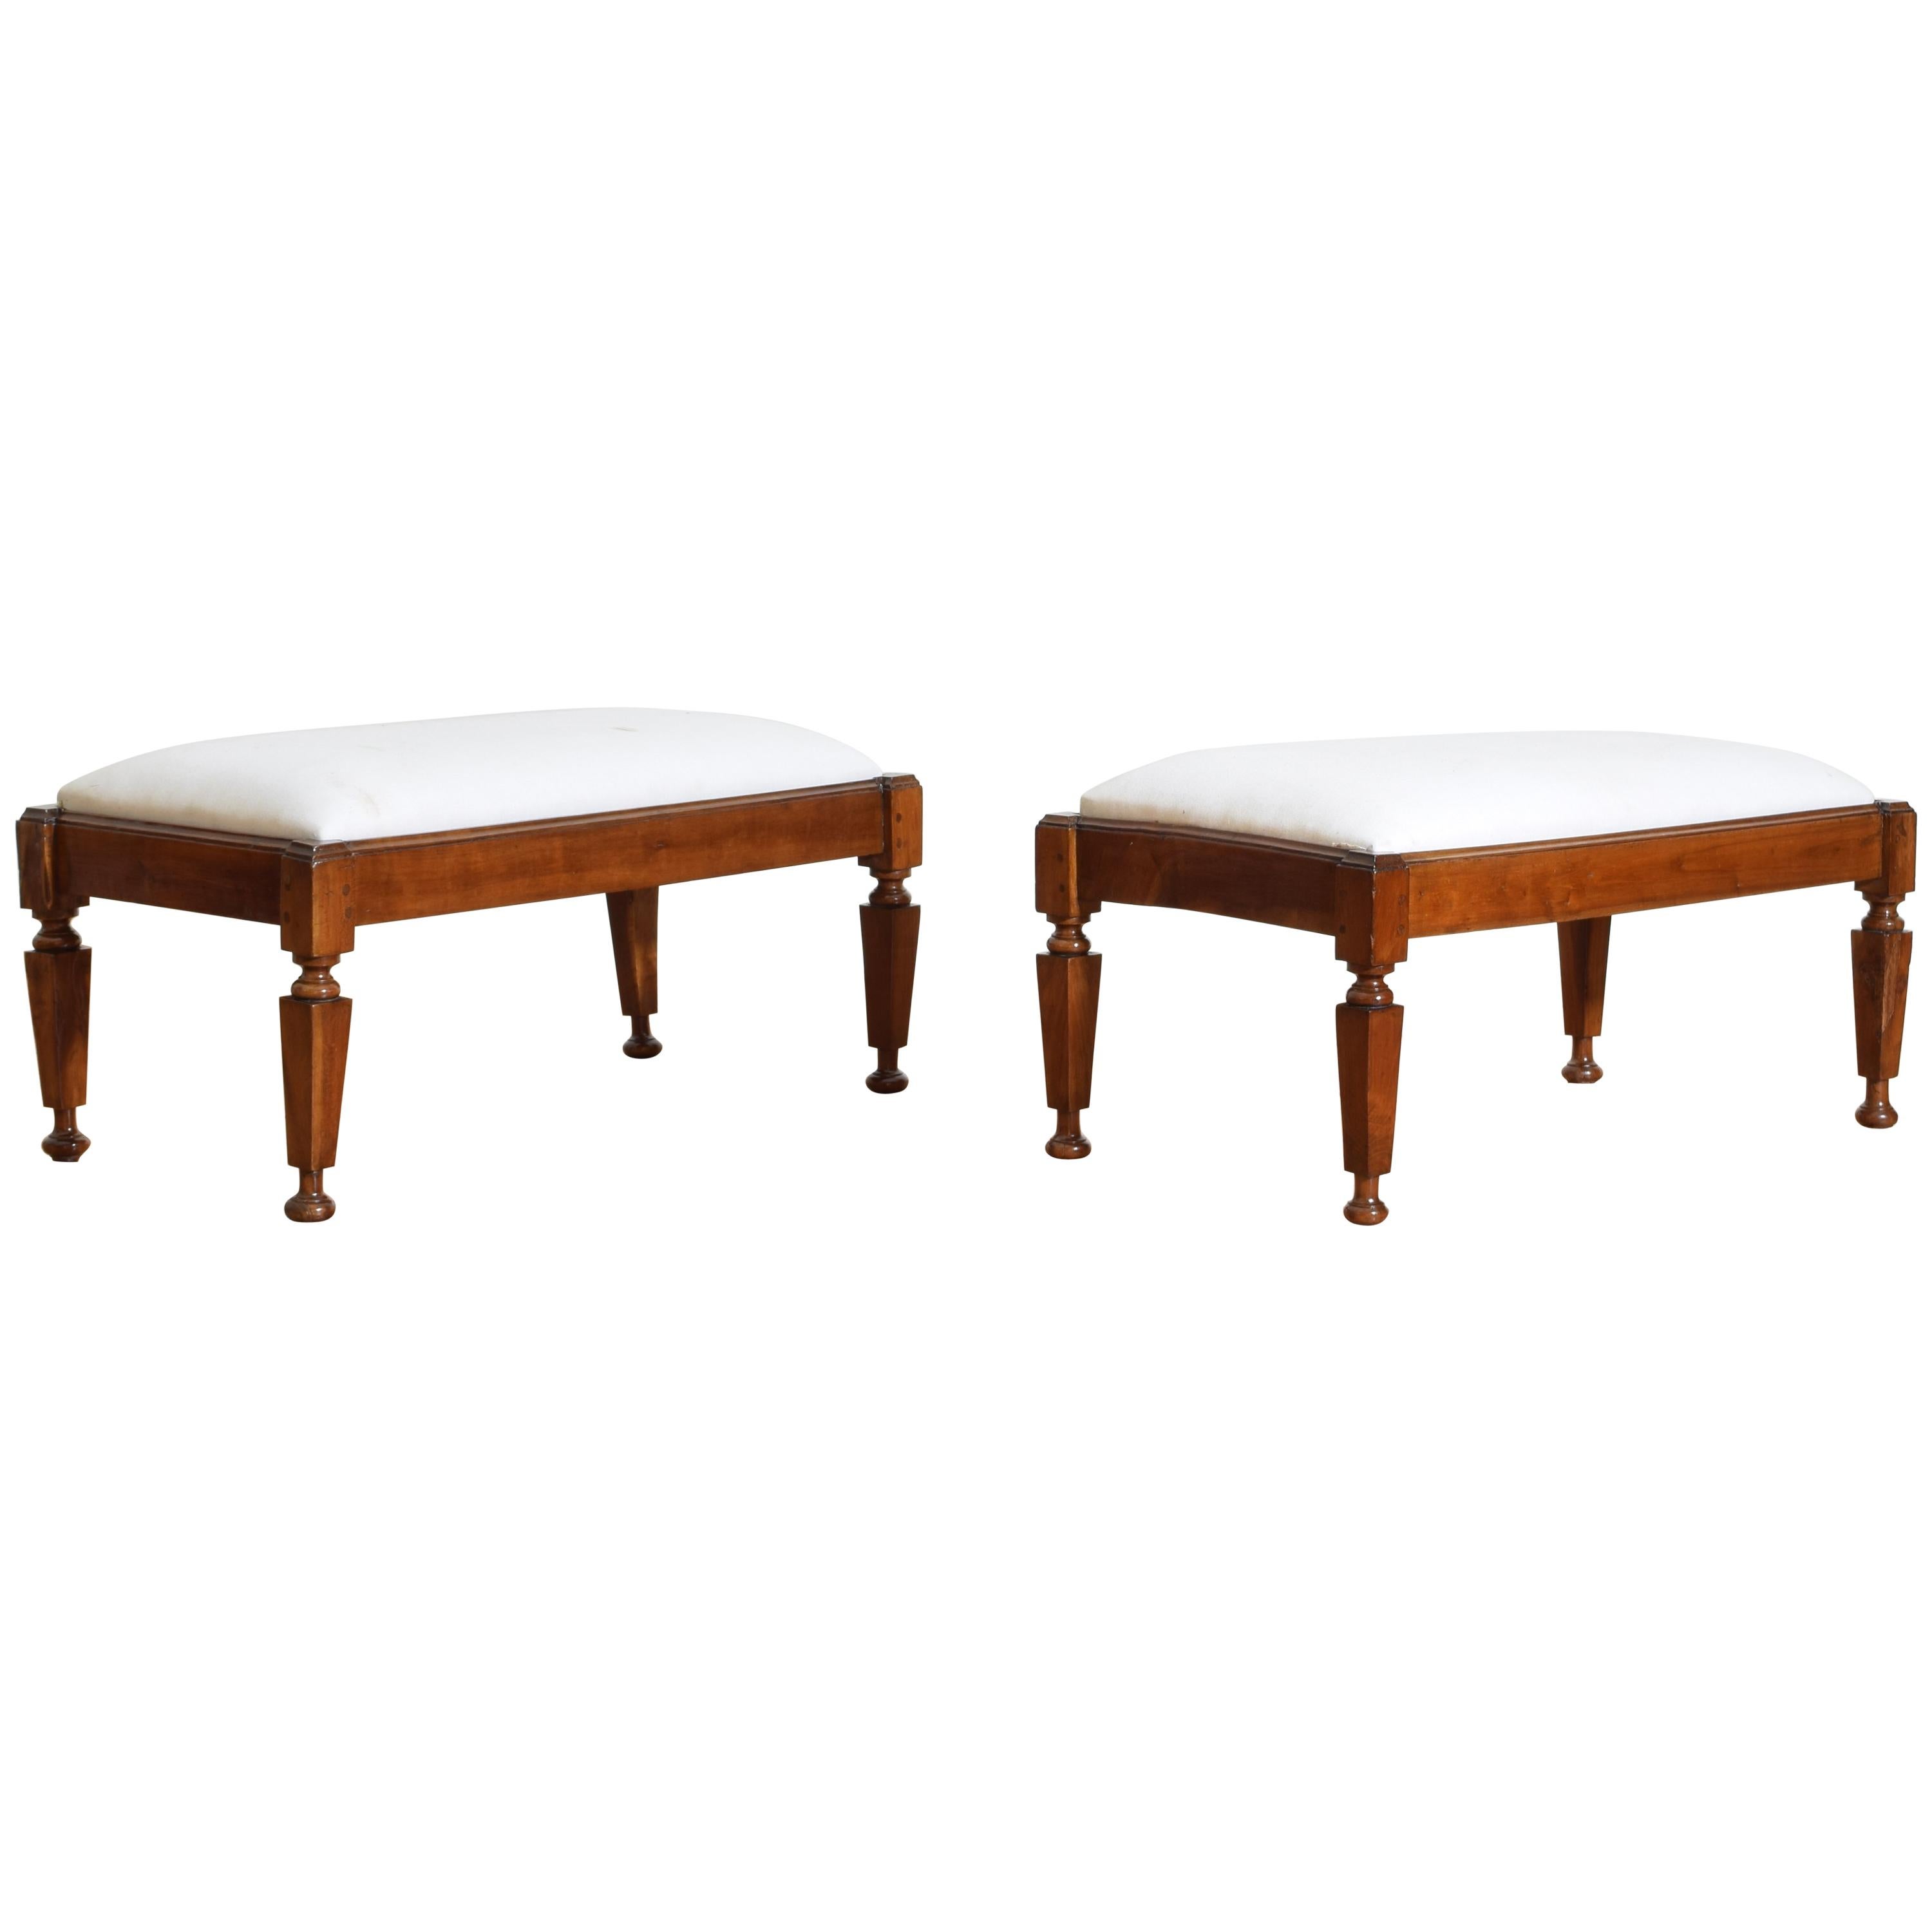 Pair of Italian Neoclassical Cherrywood Upholstered Low Benches